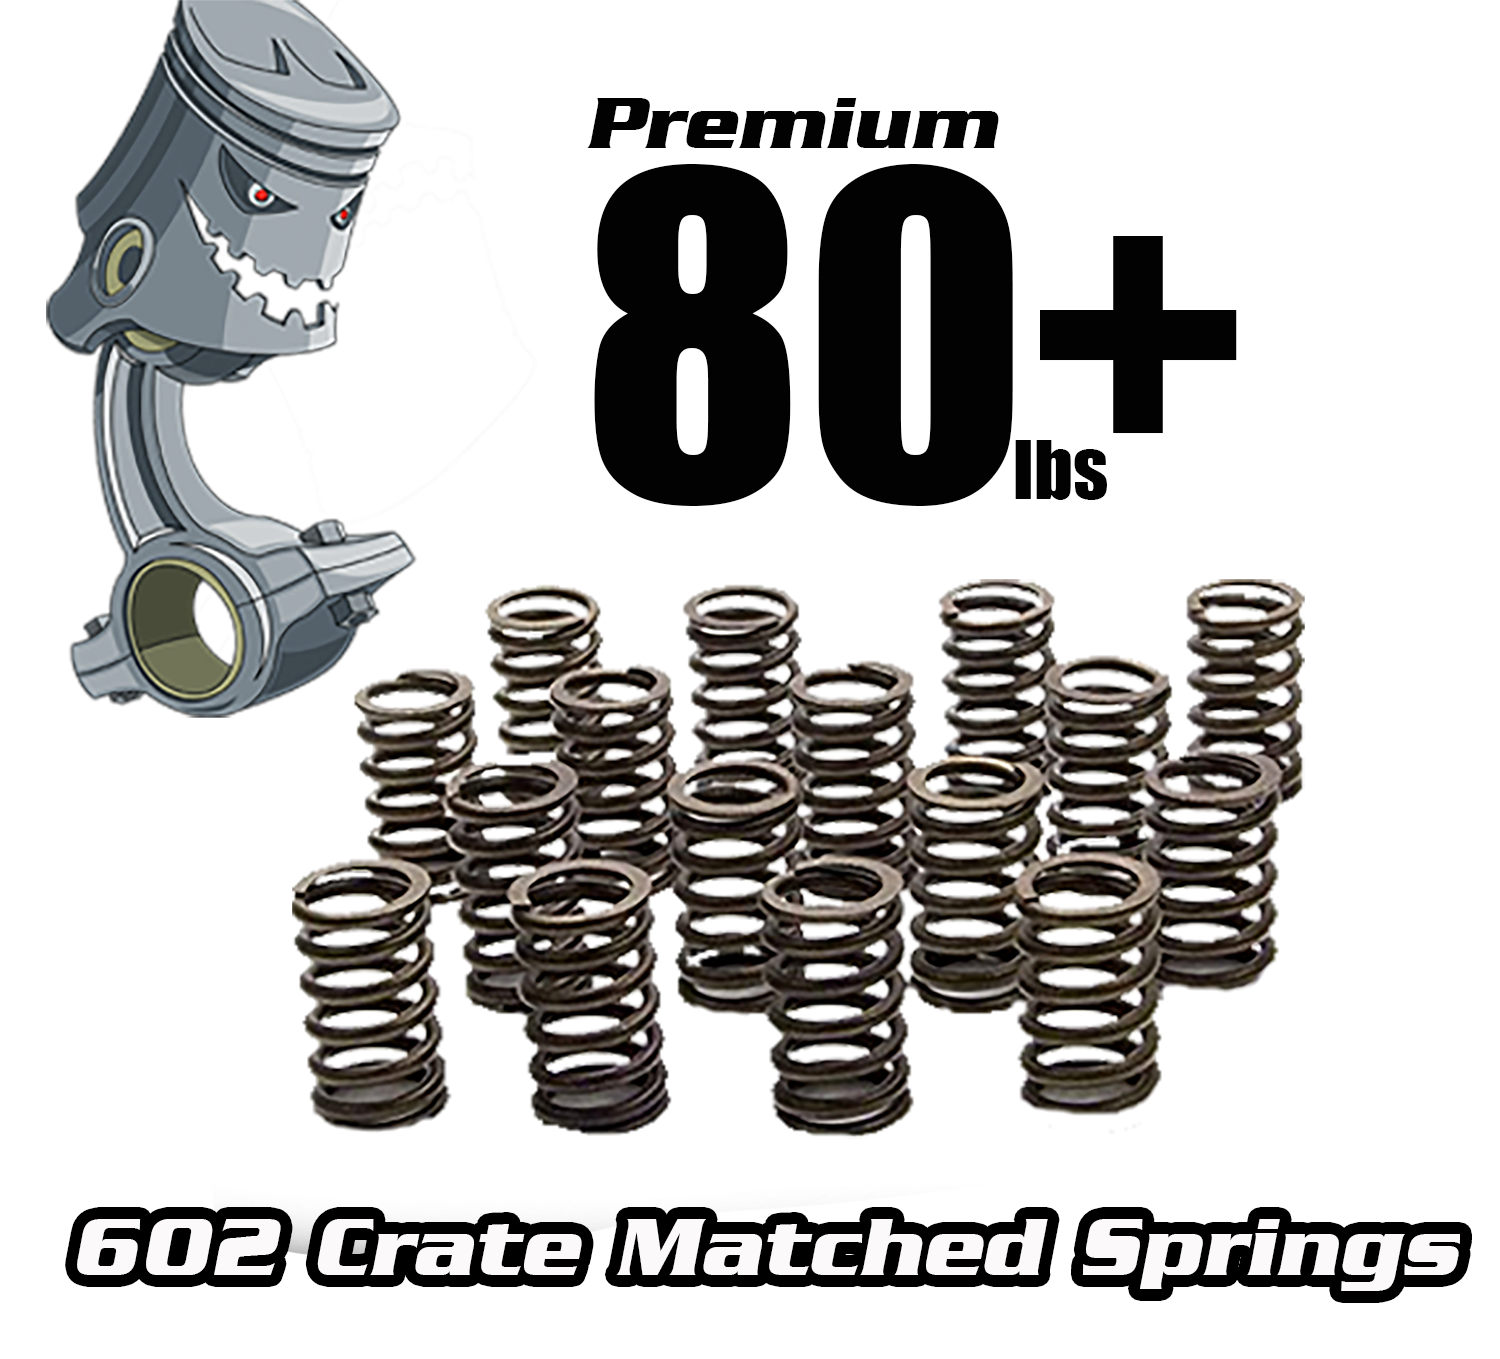 Pre-Order Premium 80lb Matched Valve Springs for 602 Crate